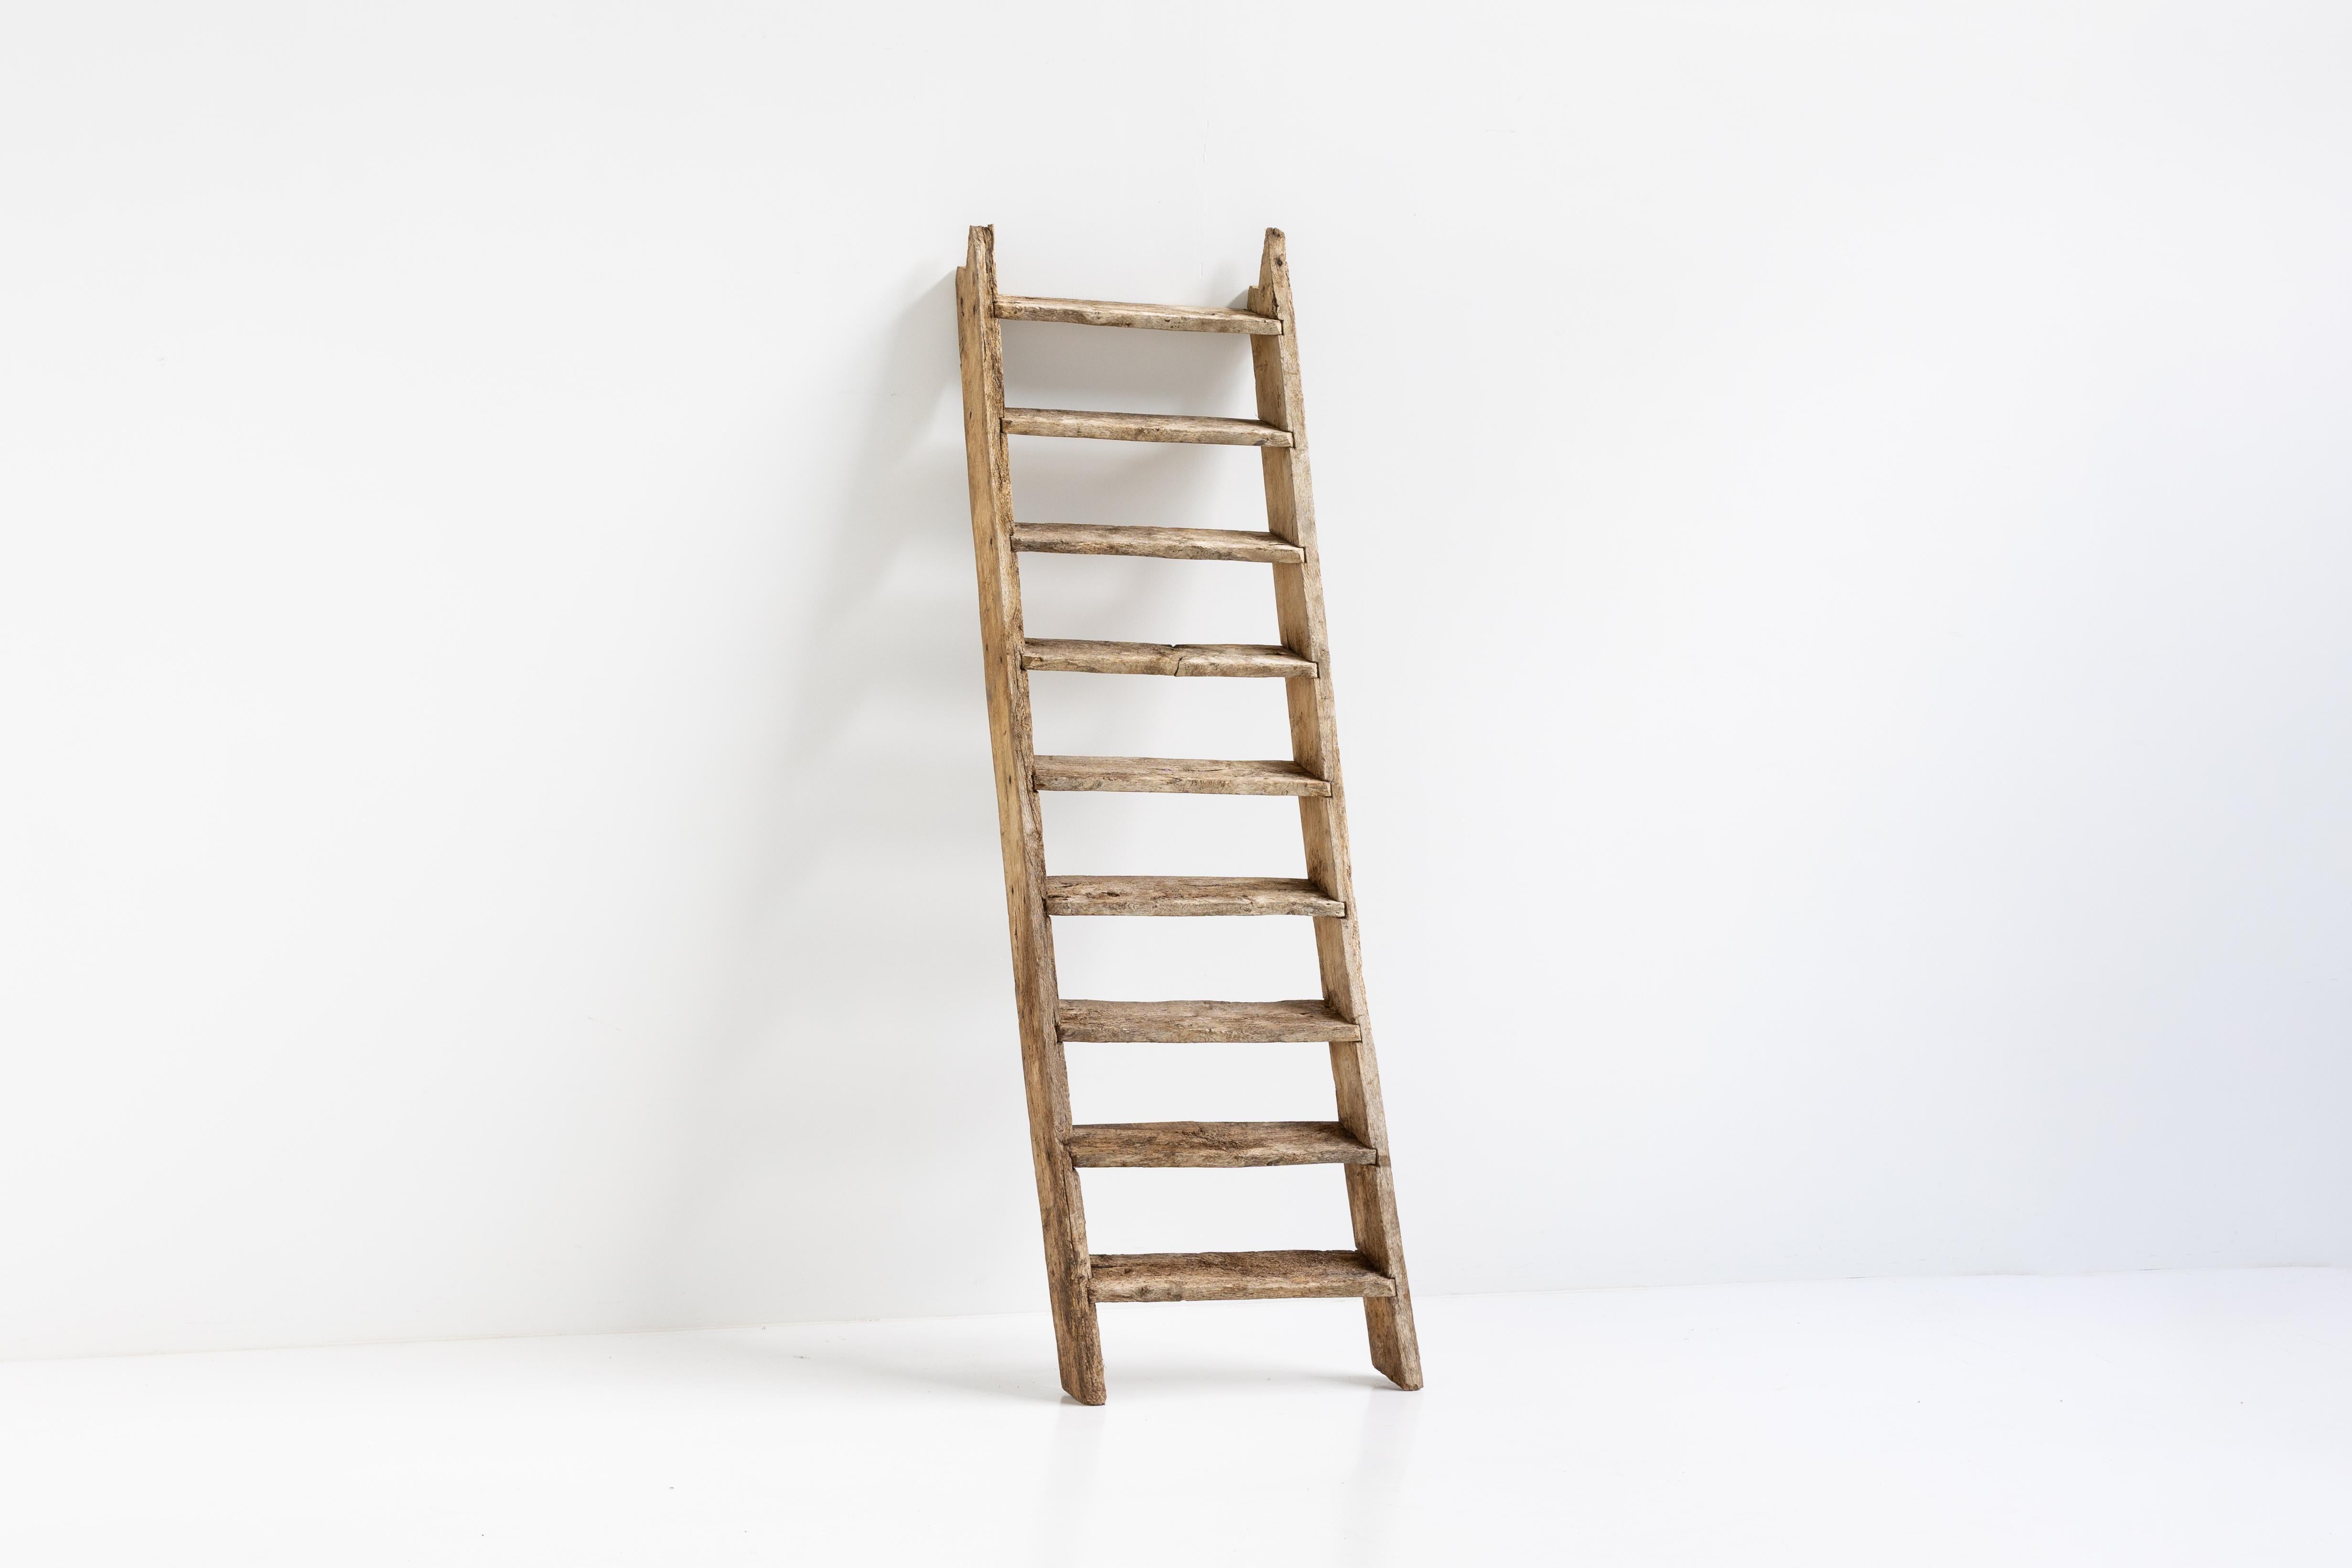 Wood Rustic Art Populaire Ladder, France, 20th Century For Sale